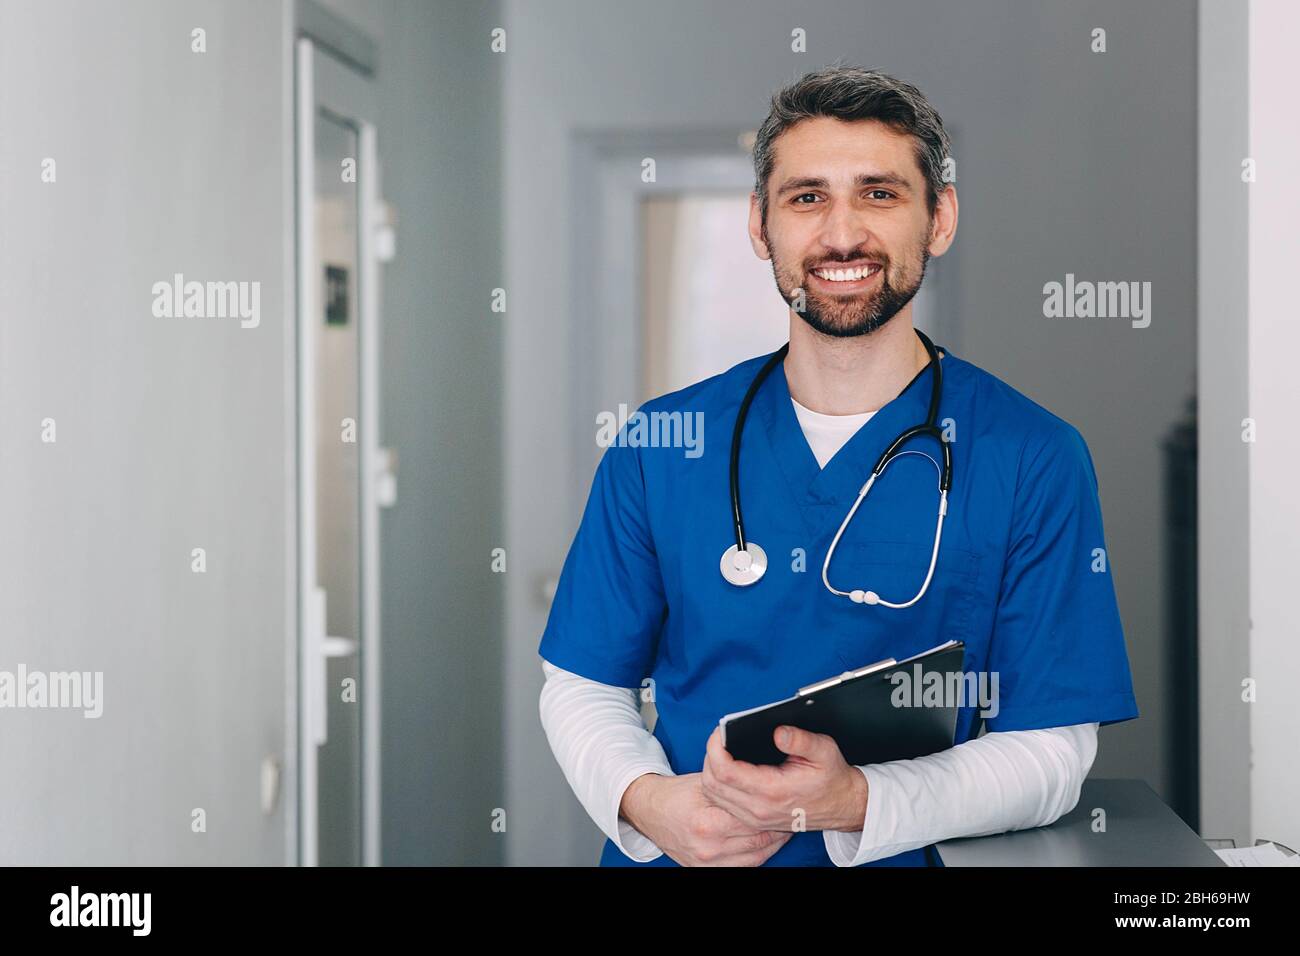 male nurse with stethoscope standing at clinic. He is smiling and looking at the camera. Stock Photo